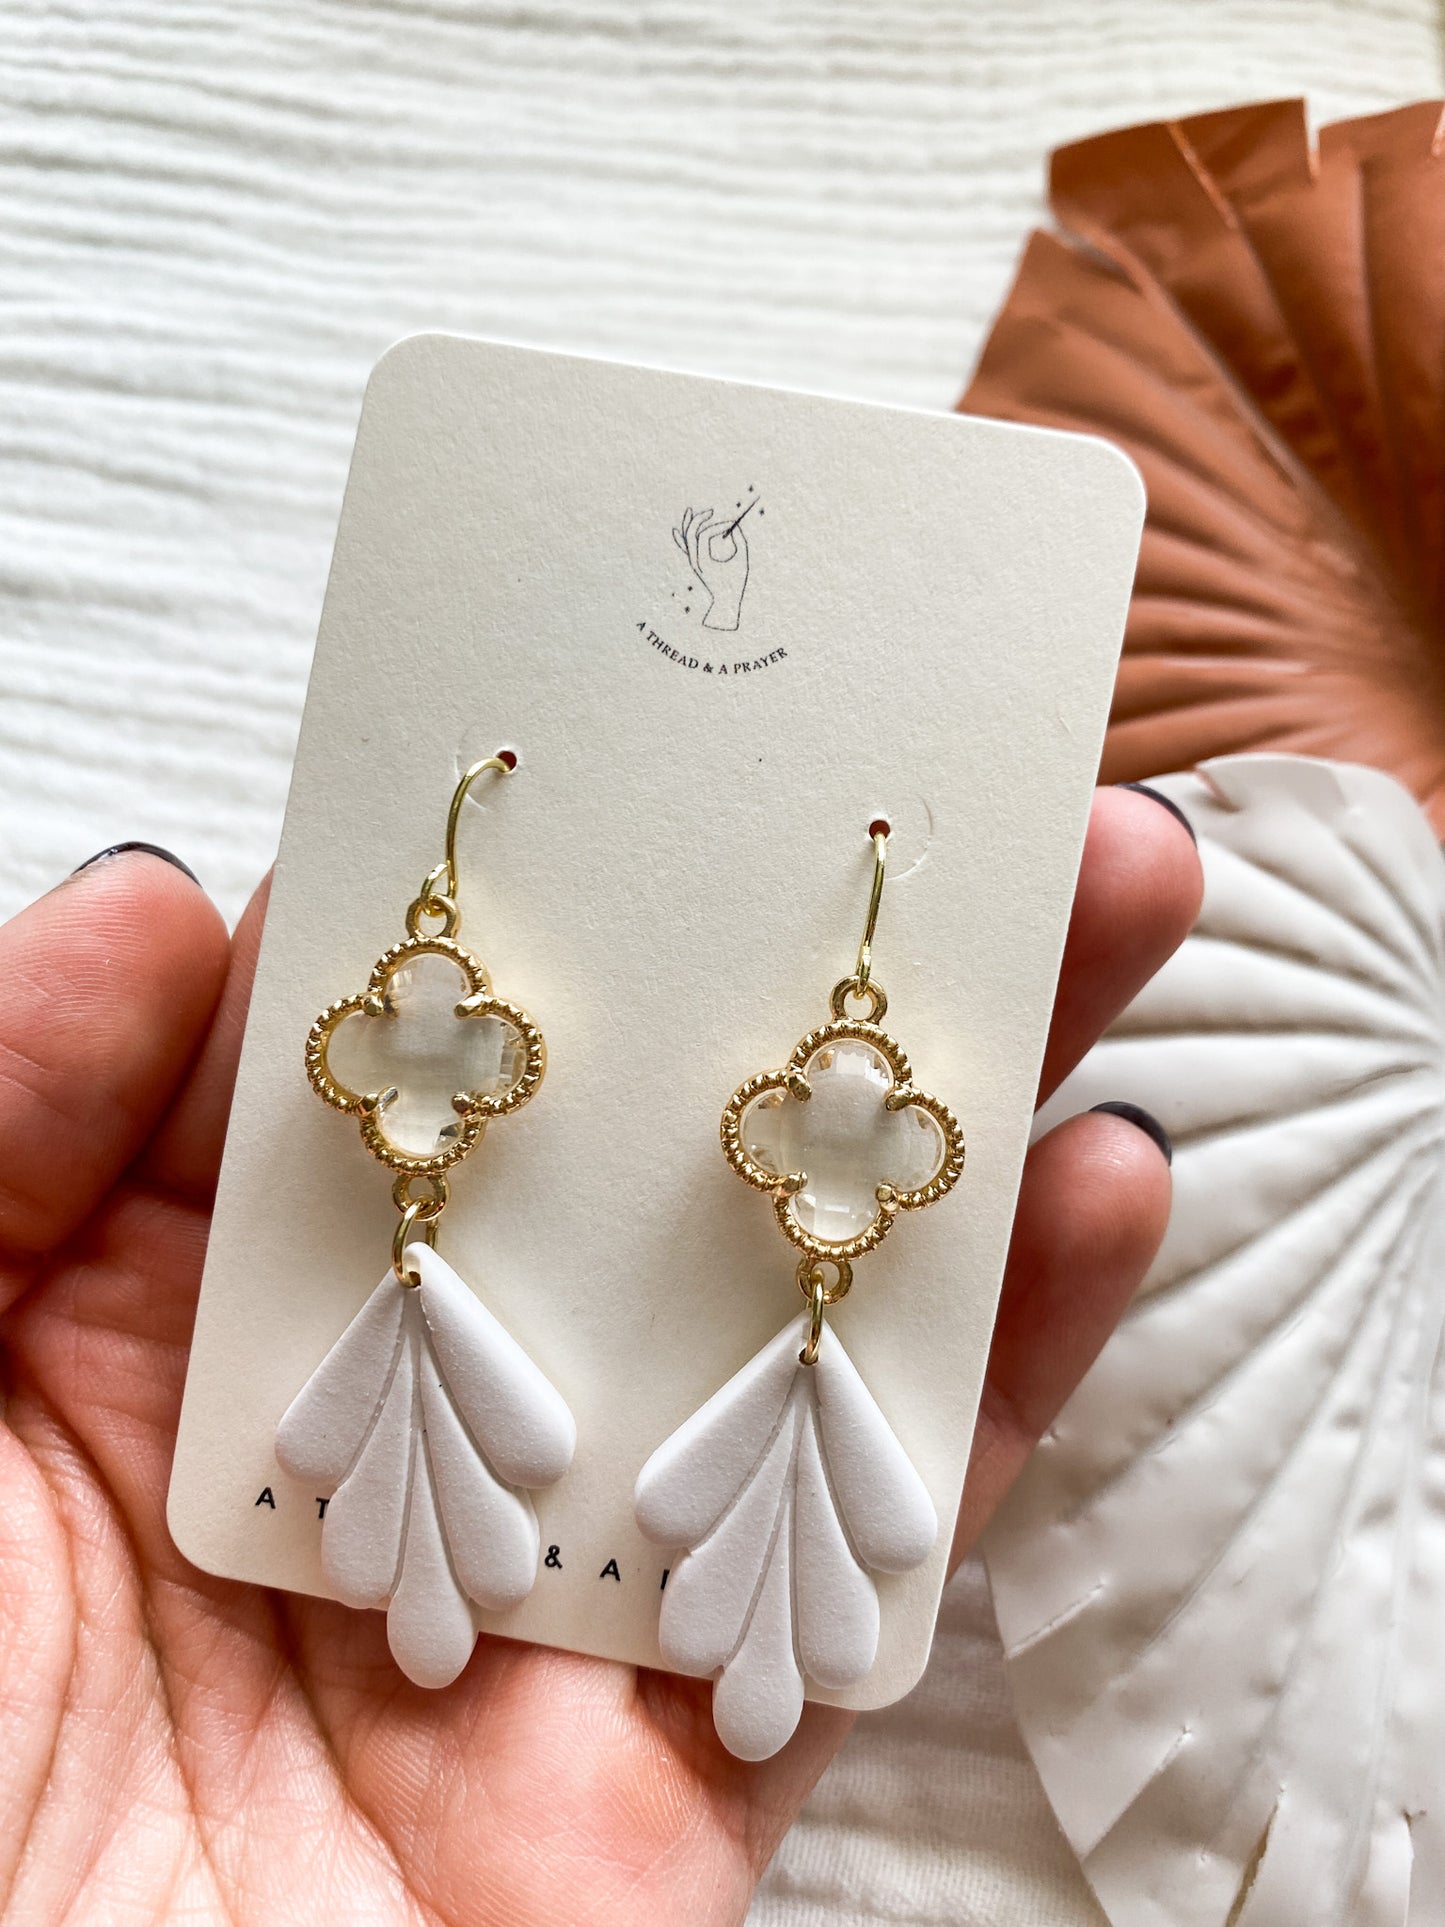 Adorable Bridal Style Earrings | Gold Accents | Bride to Be | Lightweight